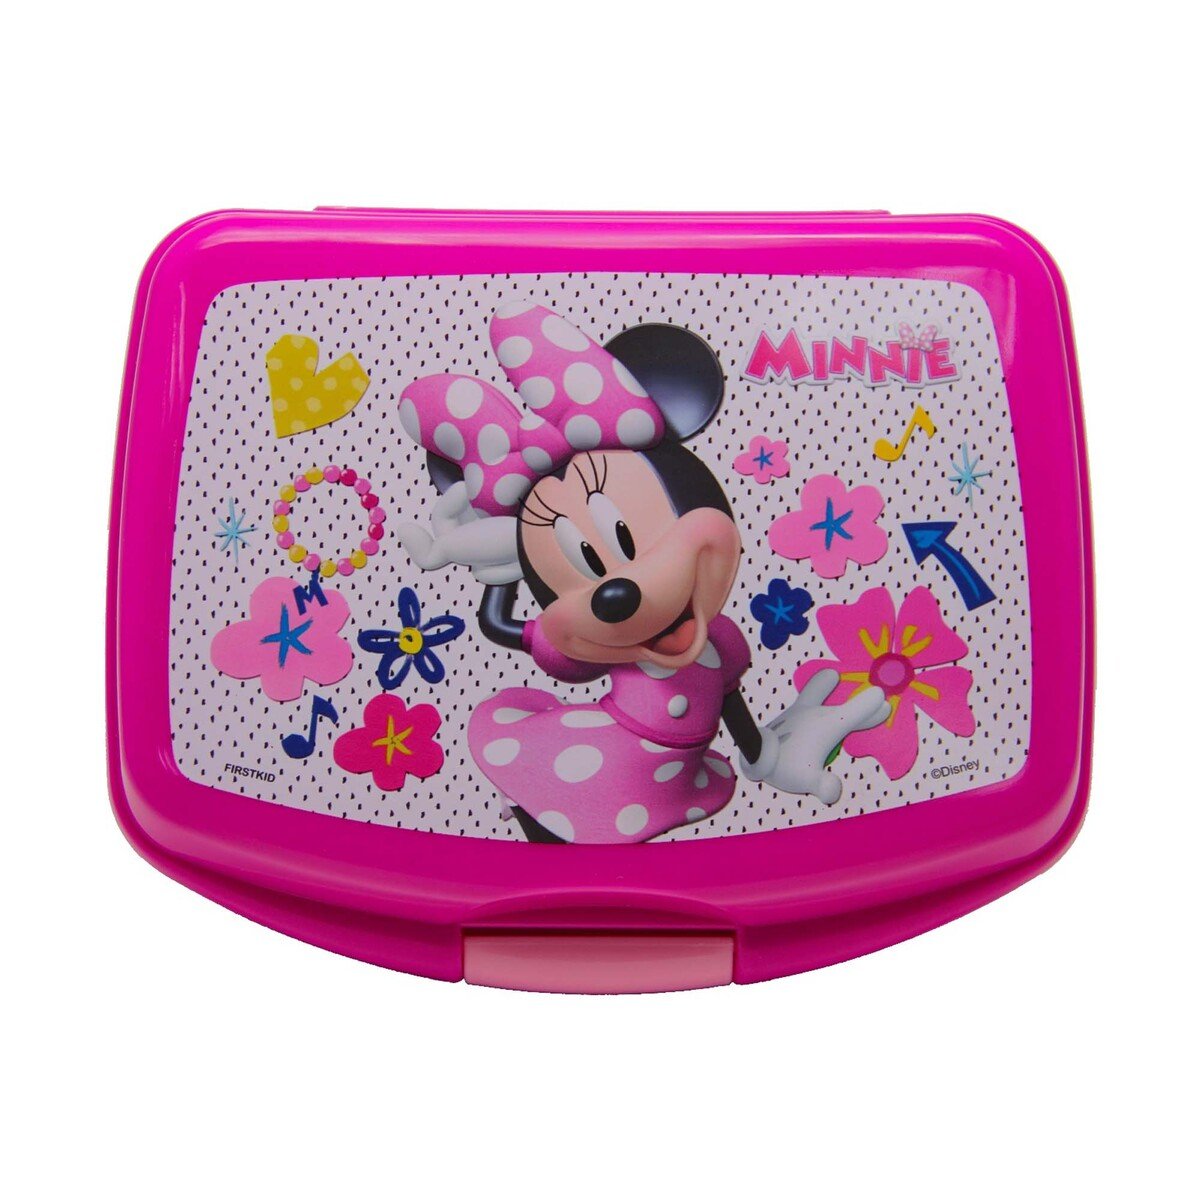 Minnie Mouse School Lunch Box 30-0811